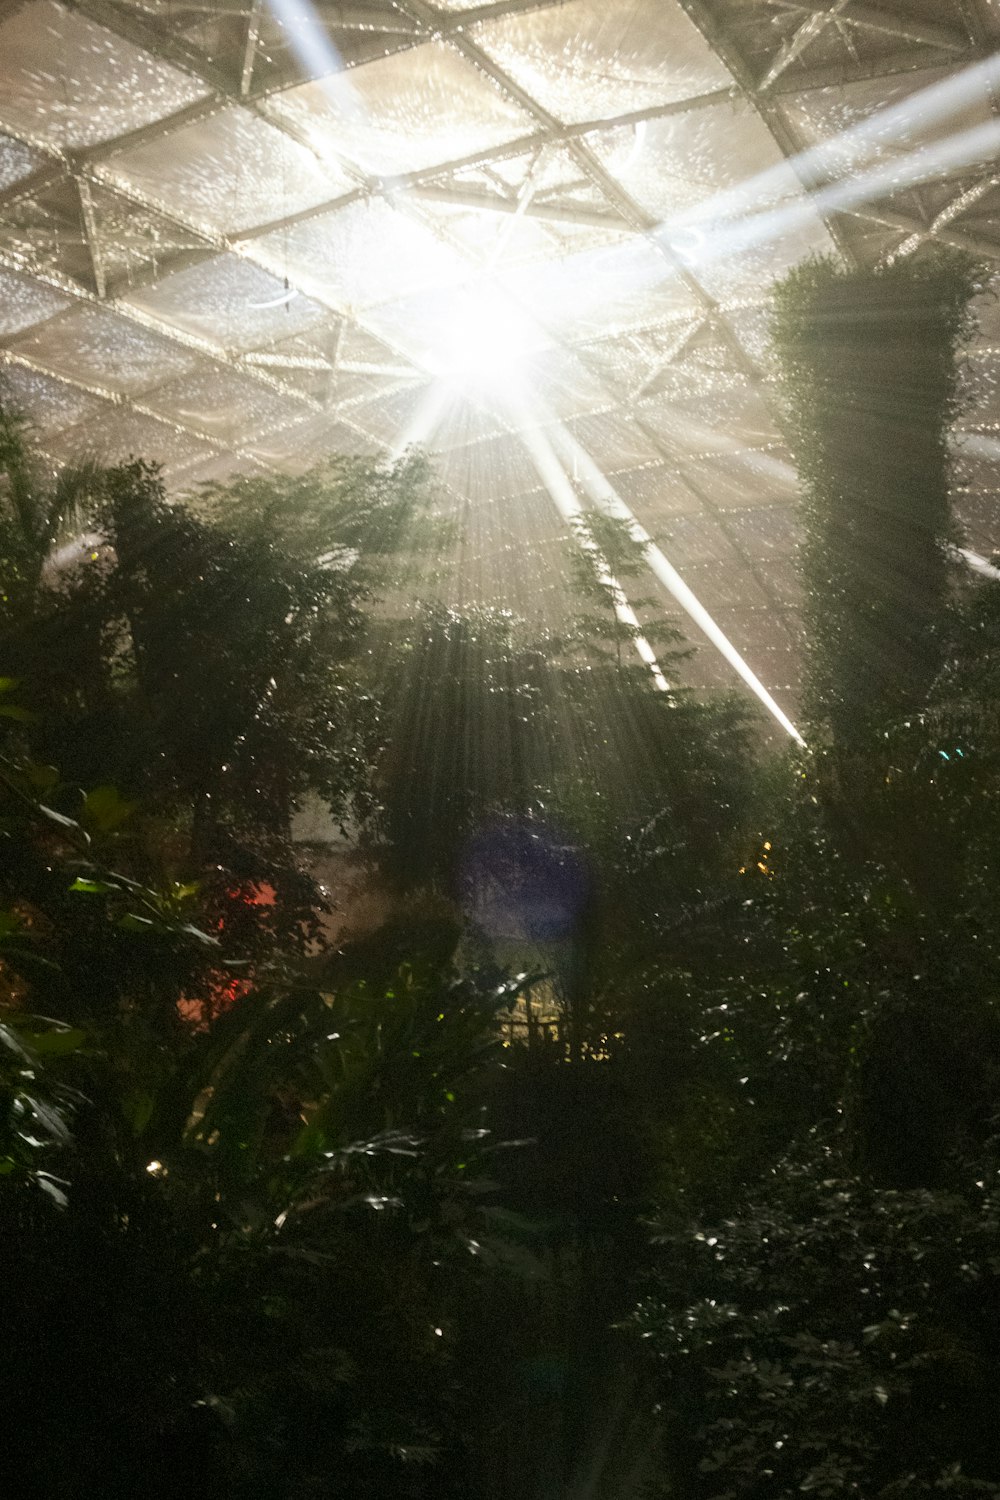 the sun shines brightly through the roof of a greenhouse